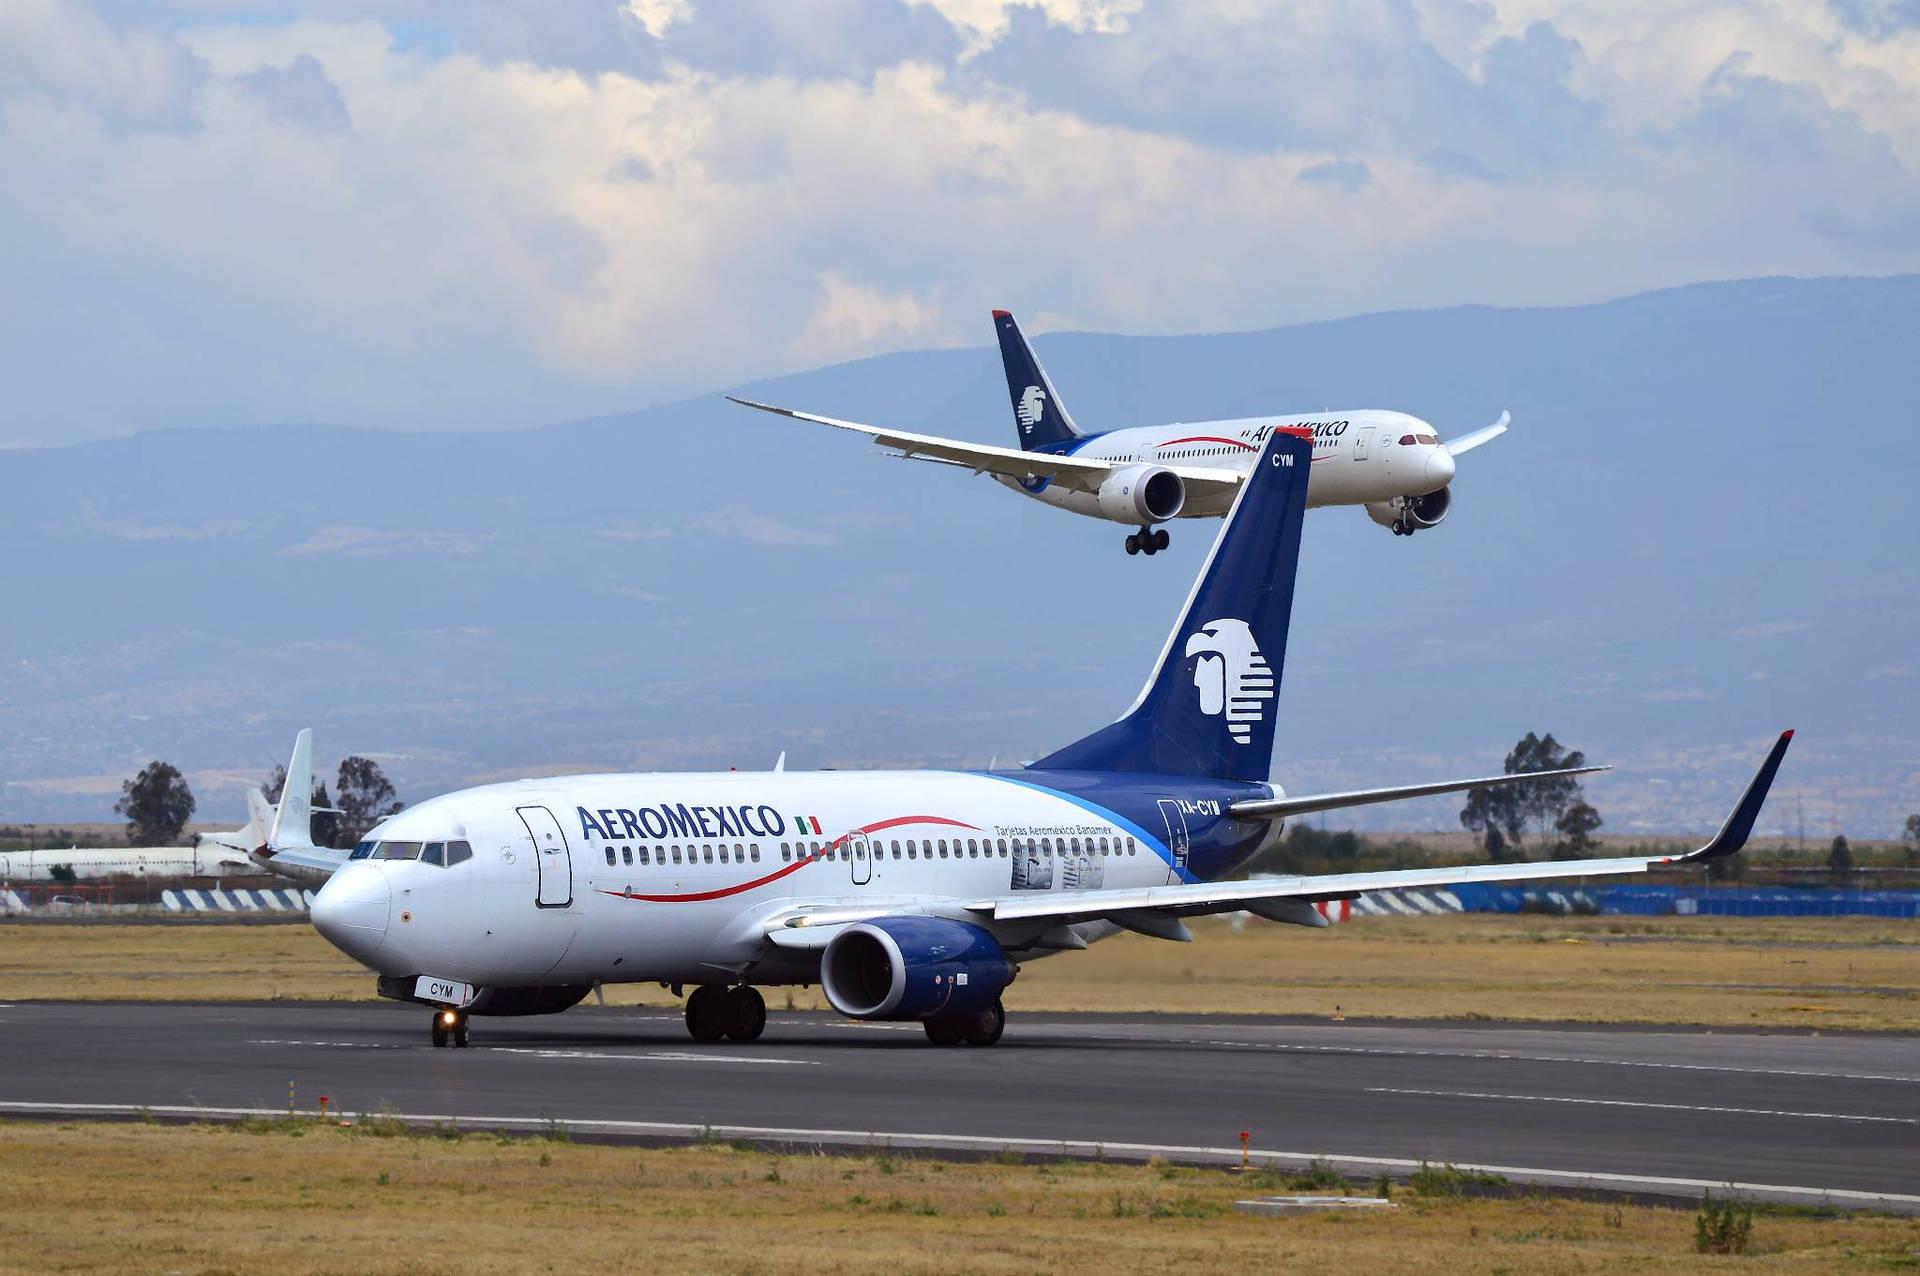 Aeromexico Airline Planes At Airport Wallpaper